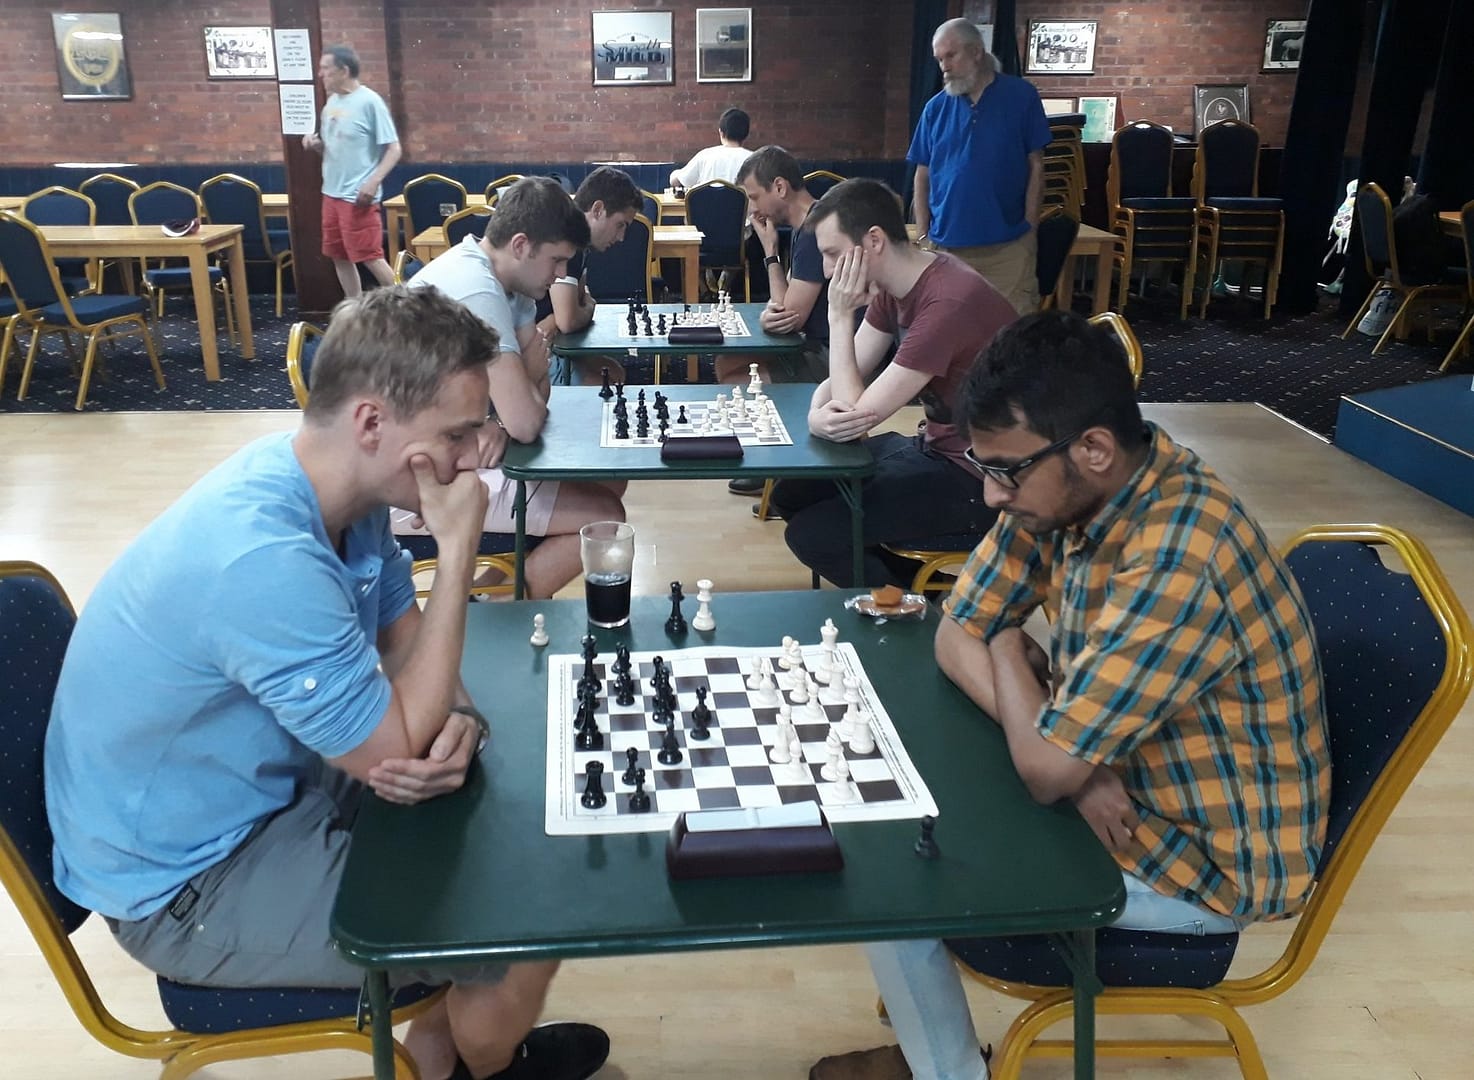 Adam good final! Blitz king Bukojemski regains crown as speed chess tourney goes down to the wire